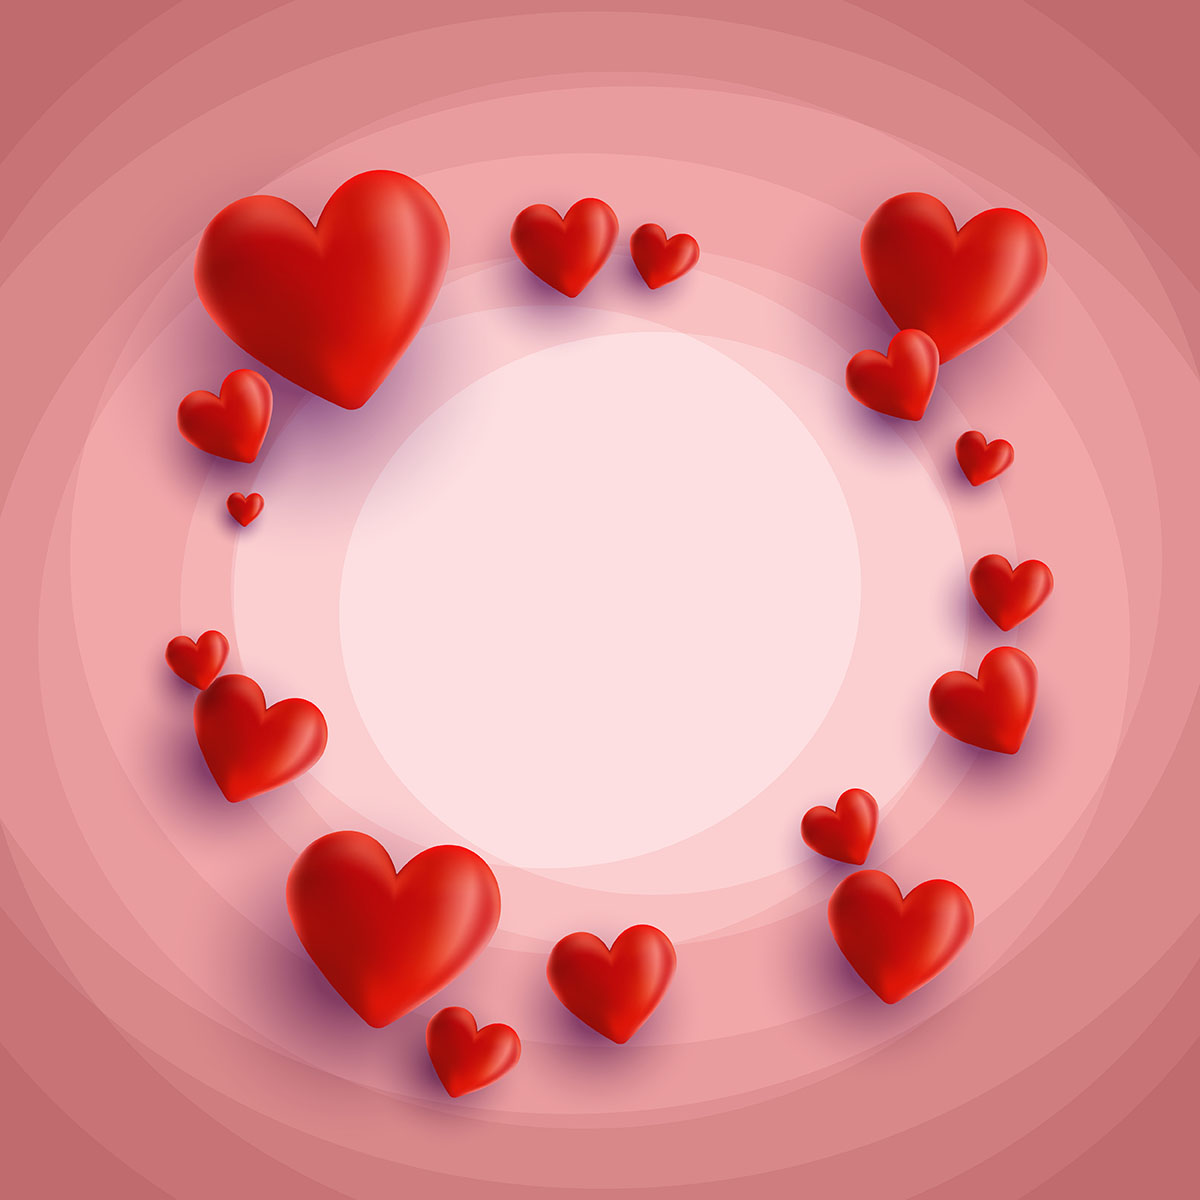 Hearts background - Download Free Vectors, Clipart ...